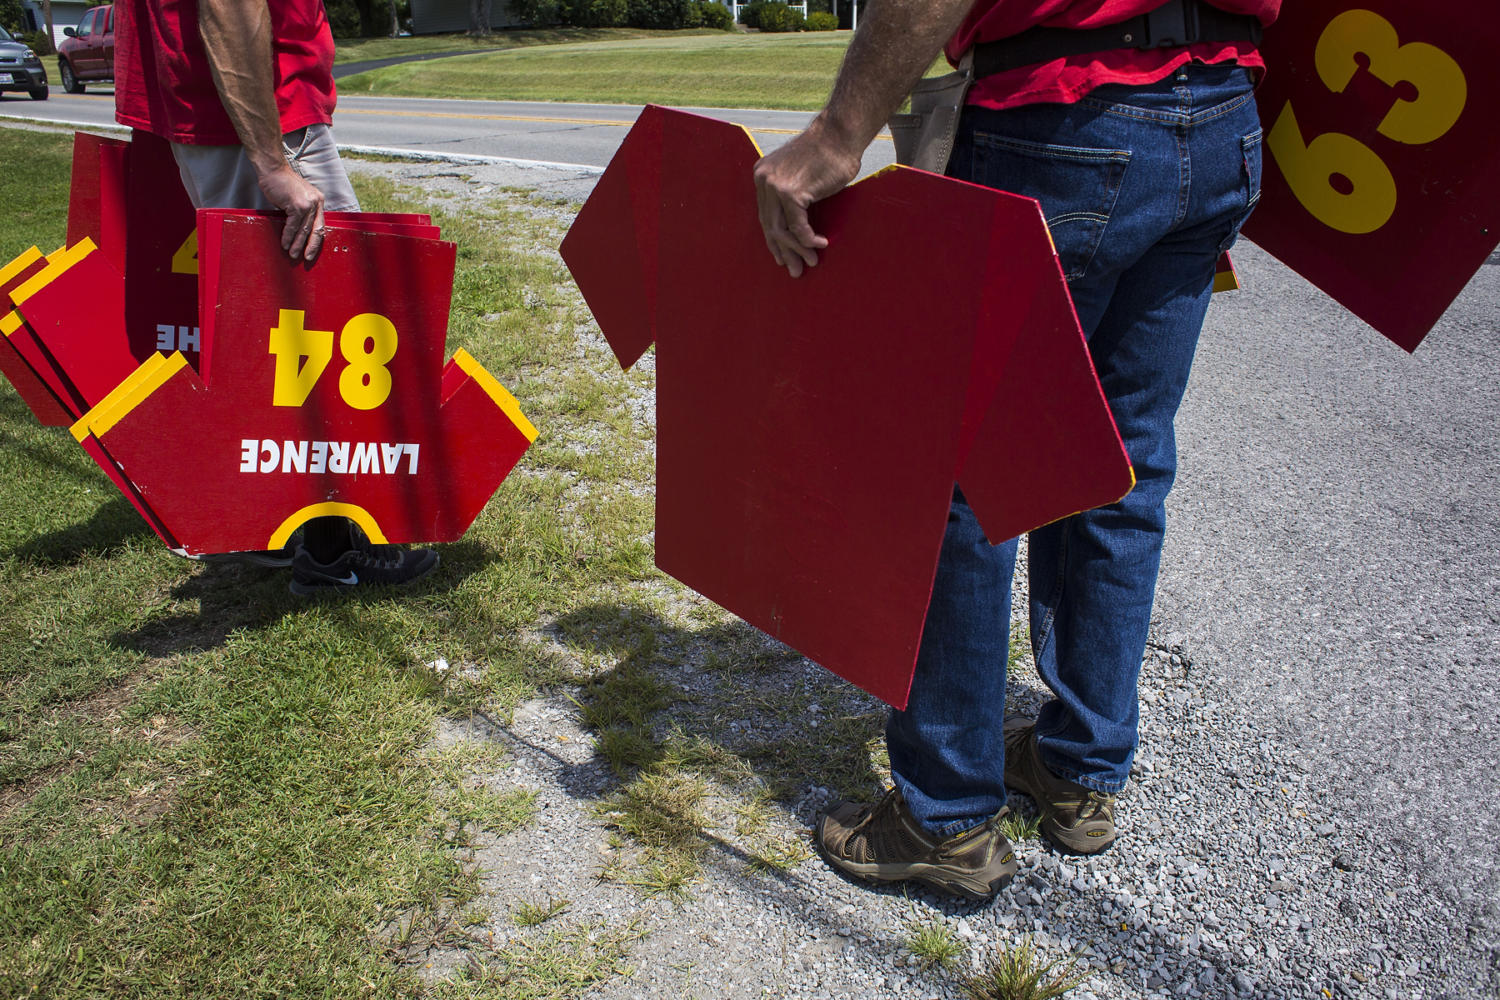 Grant Guthman, left, and Mike Karg, both of Murphysboro, hang Red Devils football jersey signs along North 14th Street prior to the 100th meeting between the Murphysboro Red Devils and the Carbondale Terriers on Friday, Aug. 25, 2017, in Murphysboro, Illinois. (Ryan Michalesko | @photosbylesko)